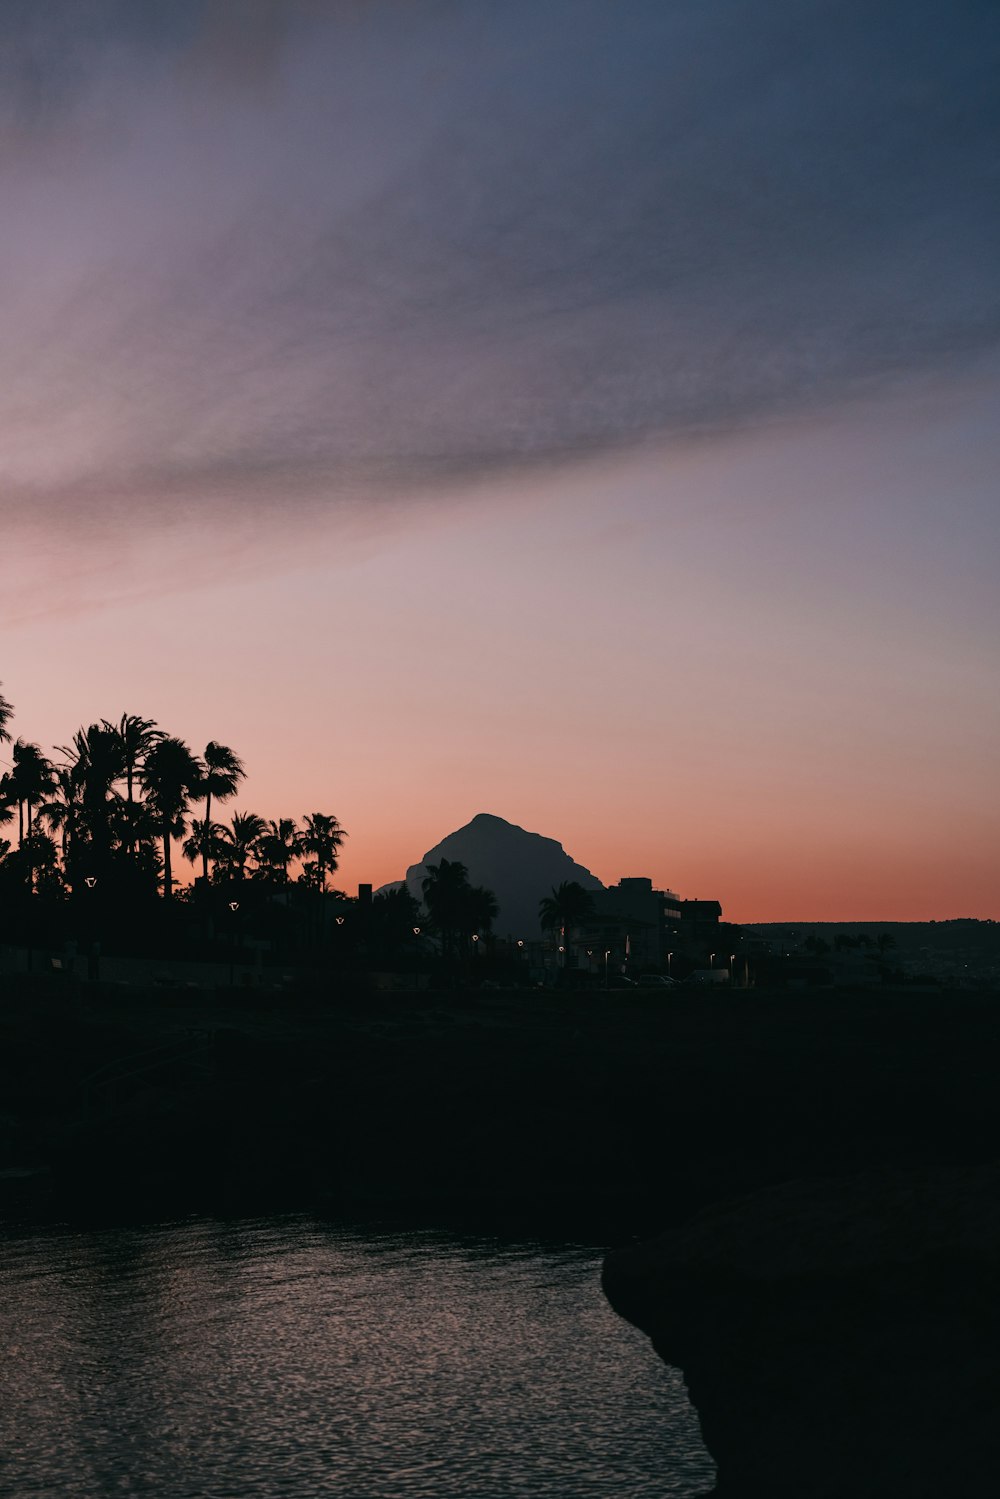 a sunset with palm trees and a mountain in the background